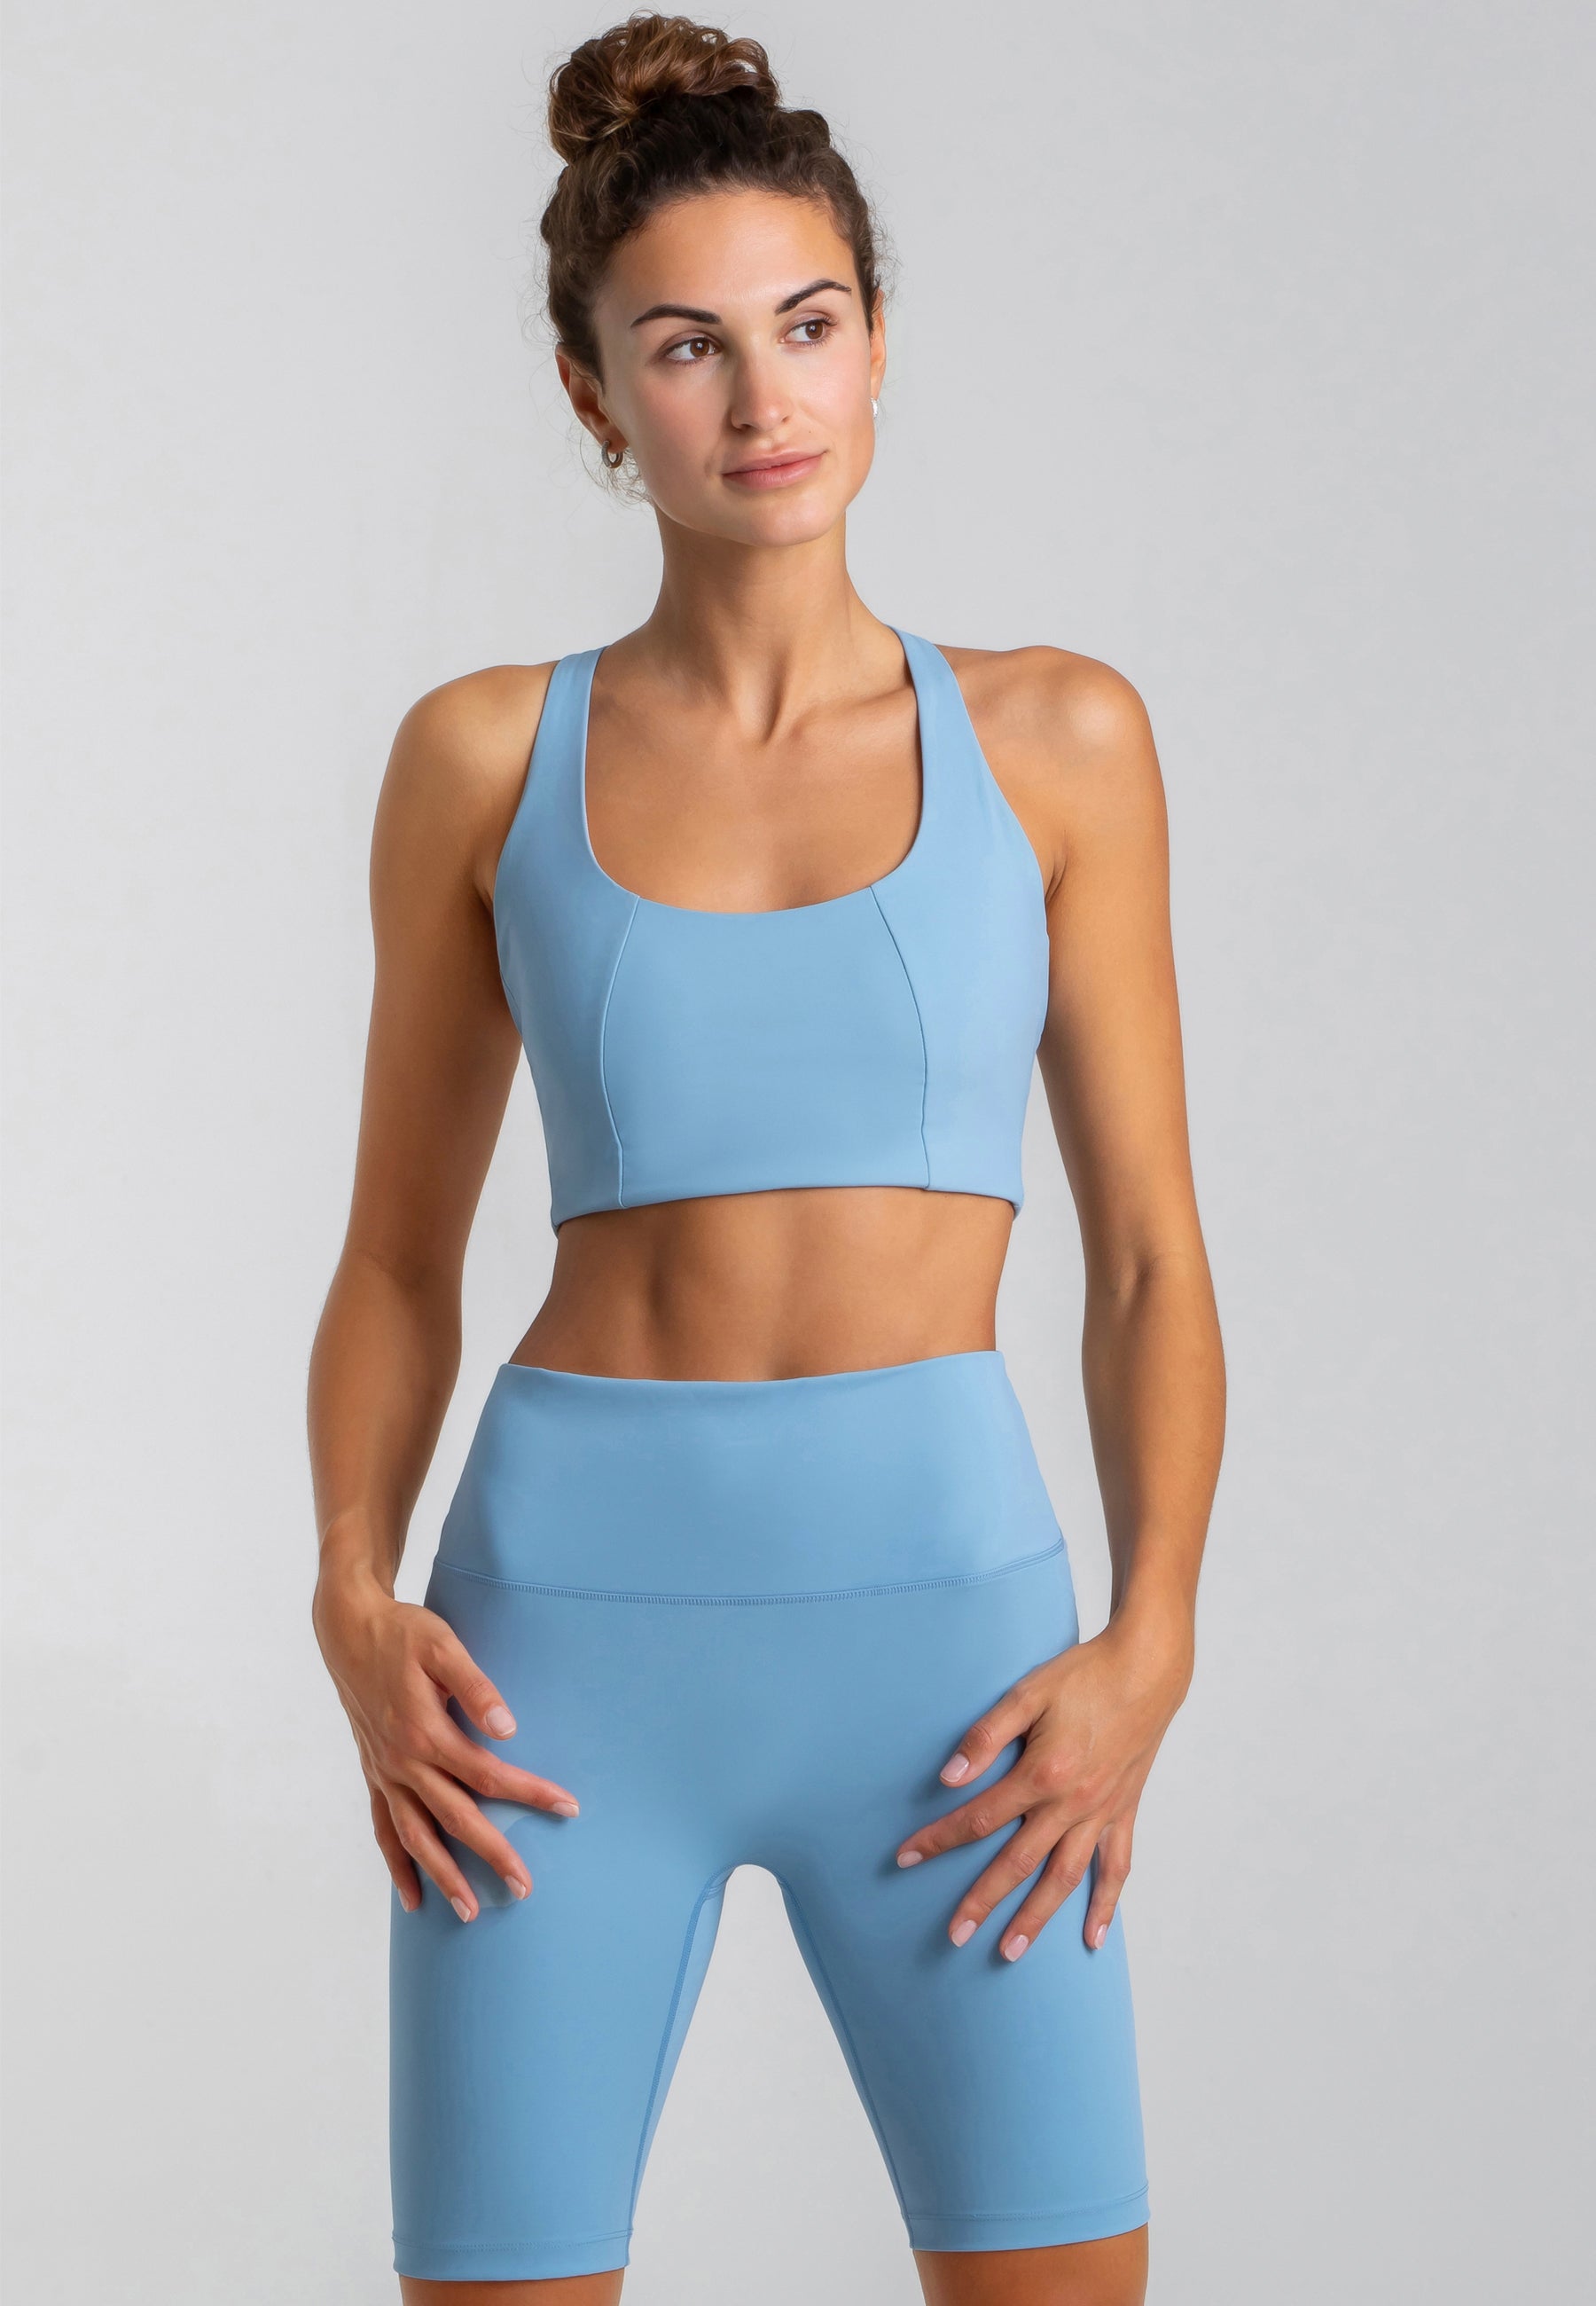 Pilates Sports Bra High Support Force dusty baby blue - AchieveP